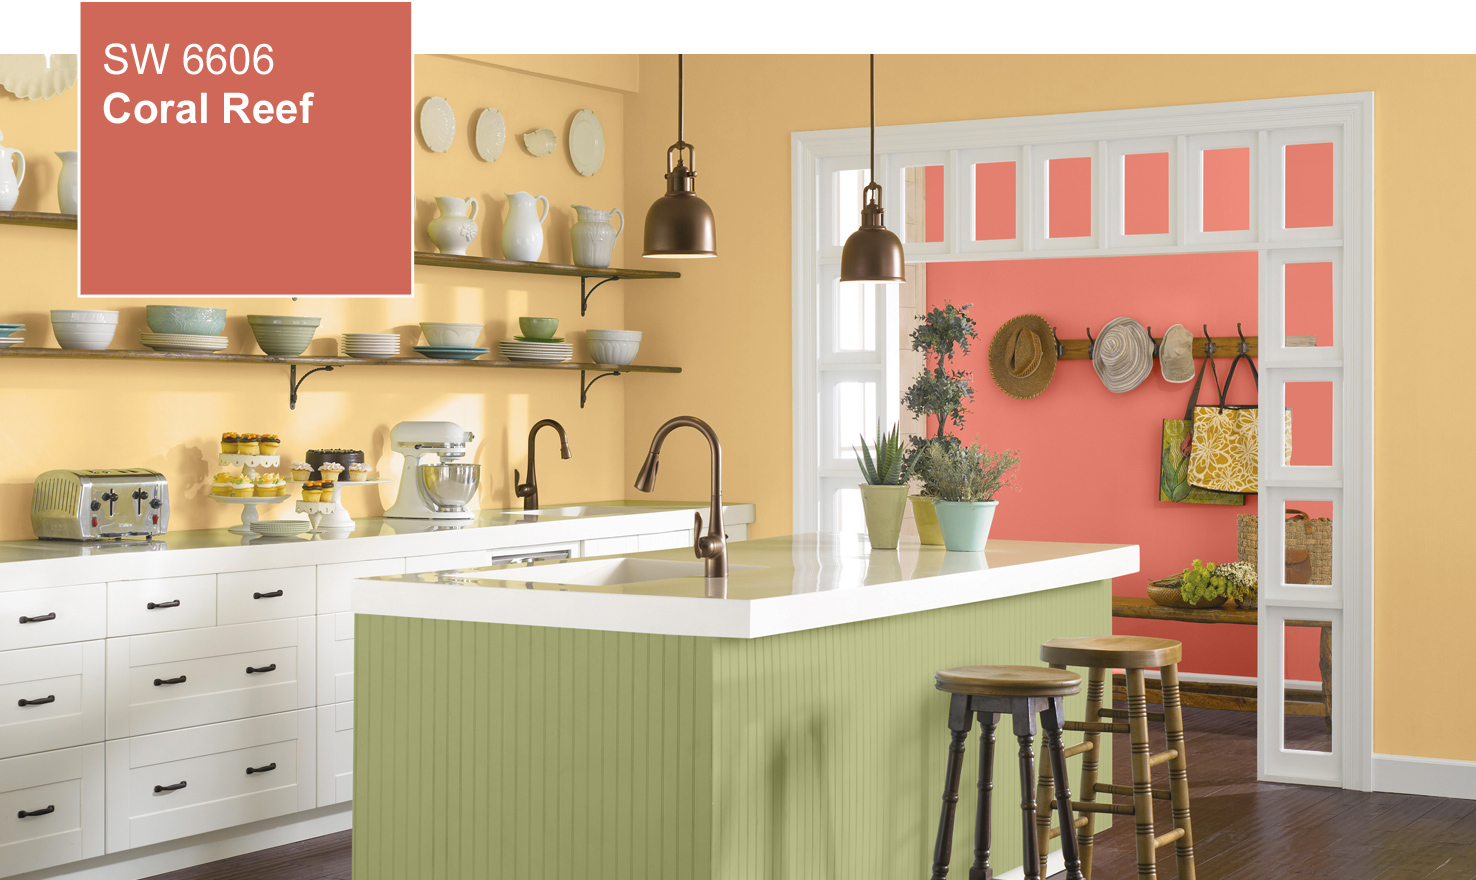 2015 Color Of The Year Coral Reef Sw 6606 By Sherwin Effy Moom Free Coloring Picture wallpaper give a chance to color on the wall without getting in trouble! Fill the walls of your home or office with stress-relieving [effymoom.blogspot.com]